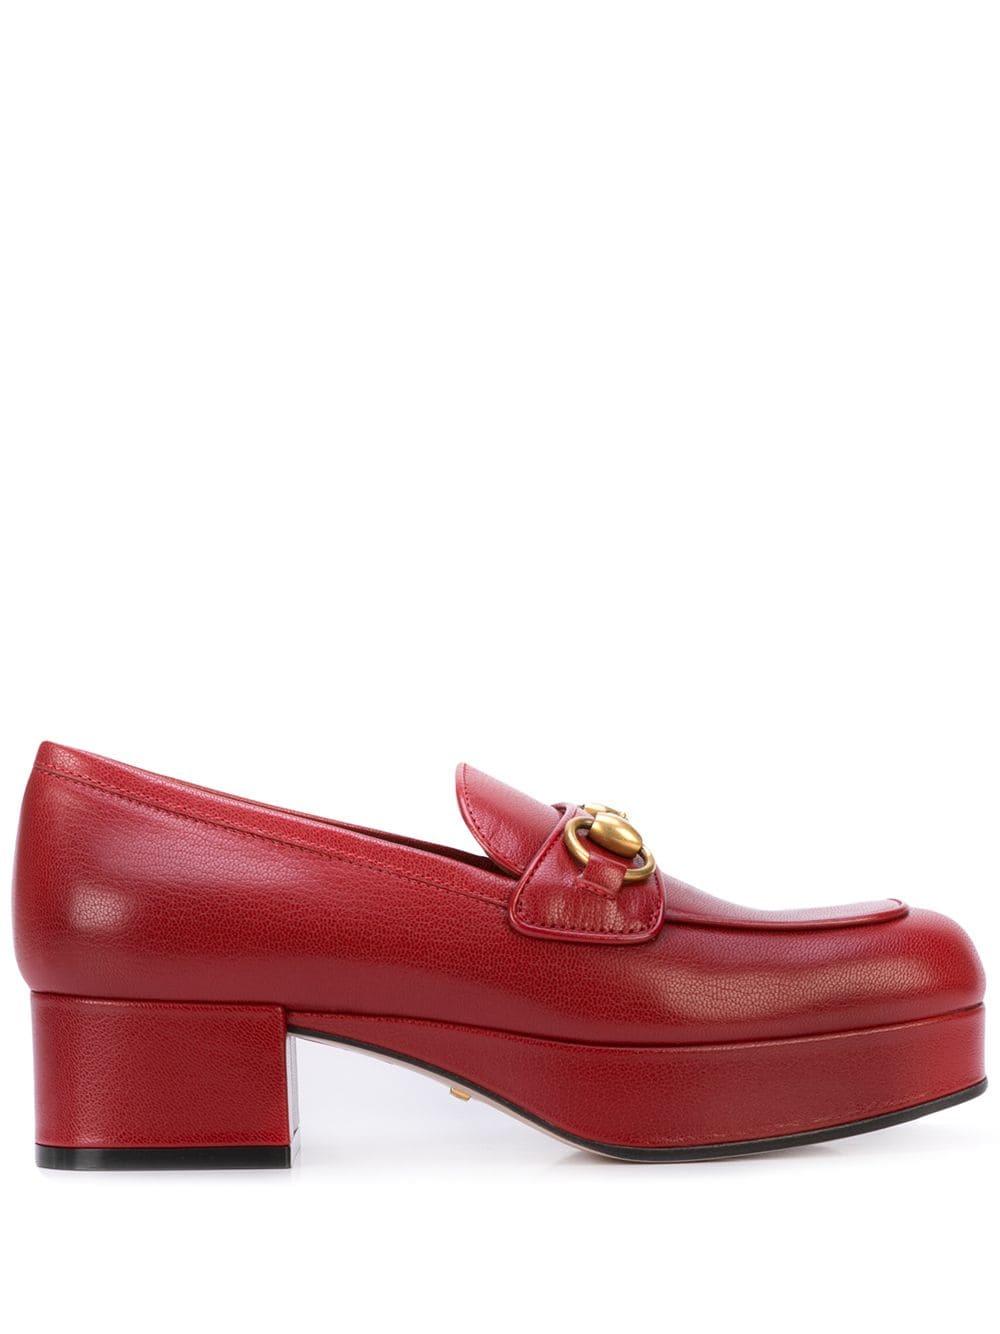 Gucci Leather Platform Loafer With Horsebit in Red - Lyst